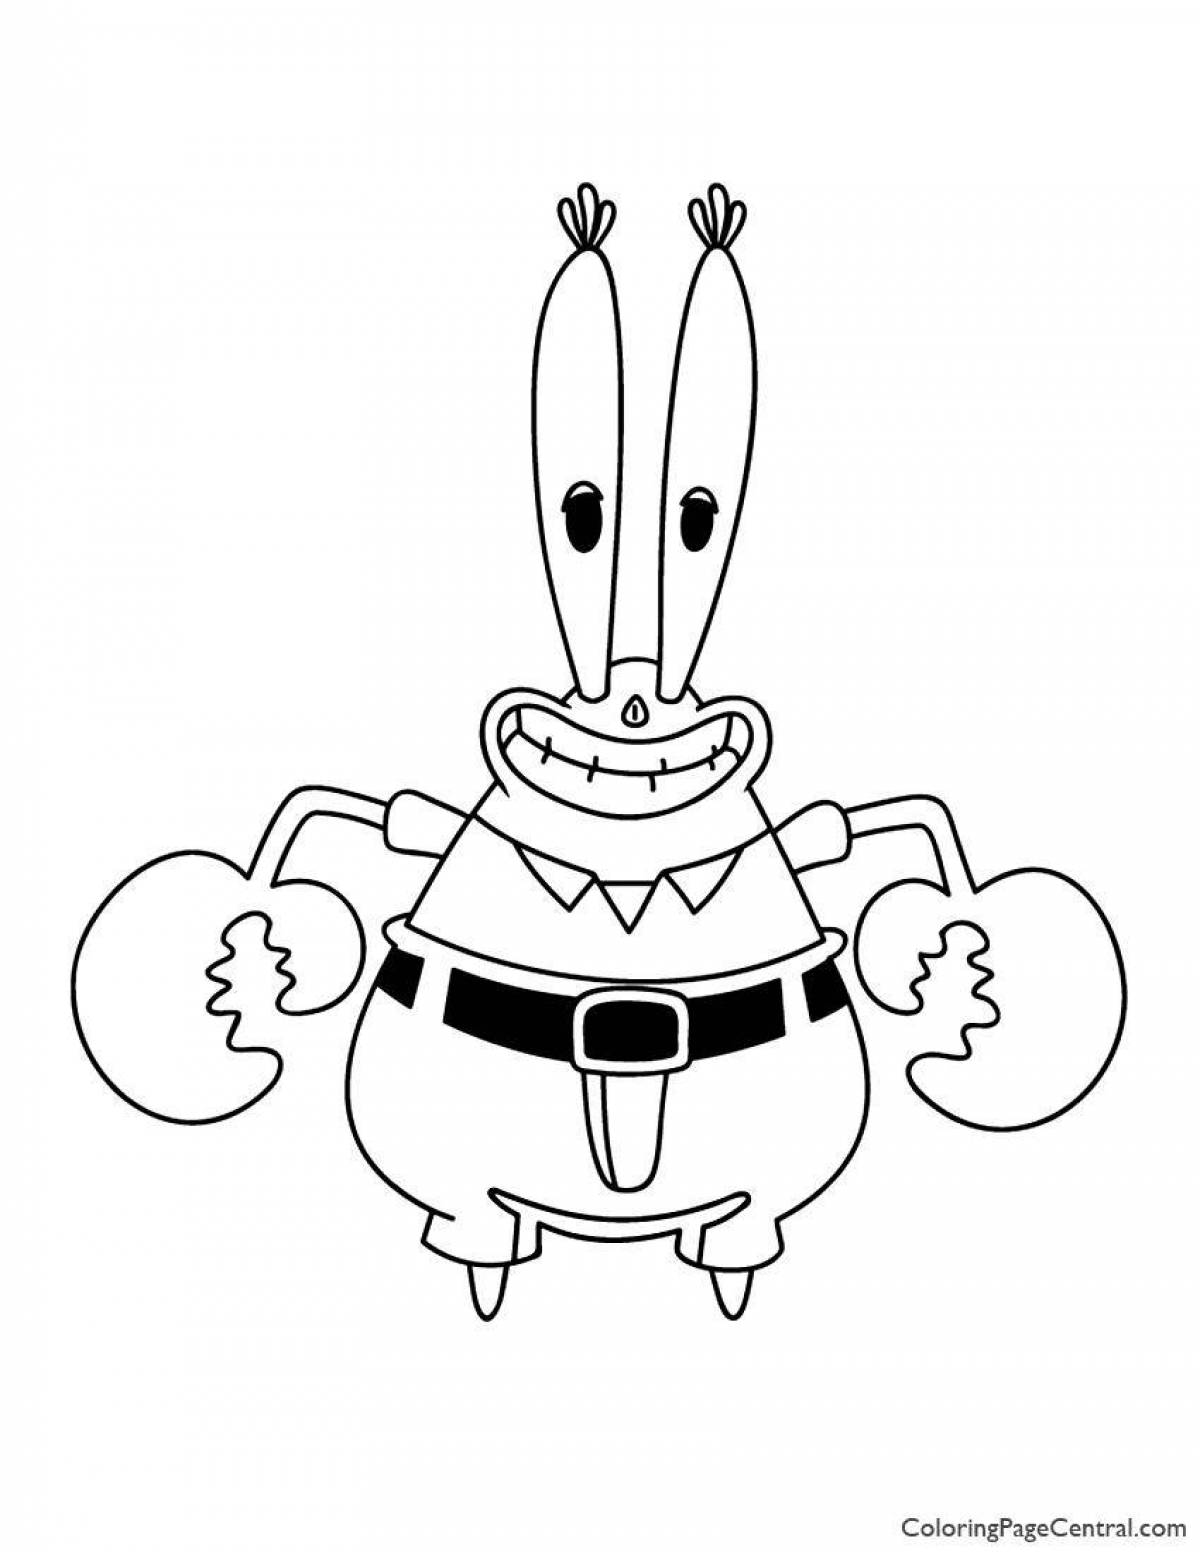 Colorful mr krabs coloring page